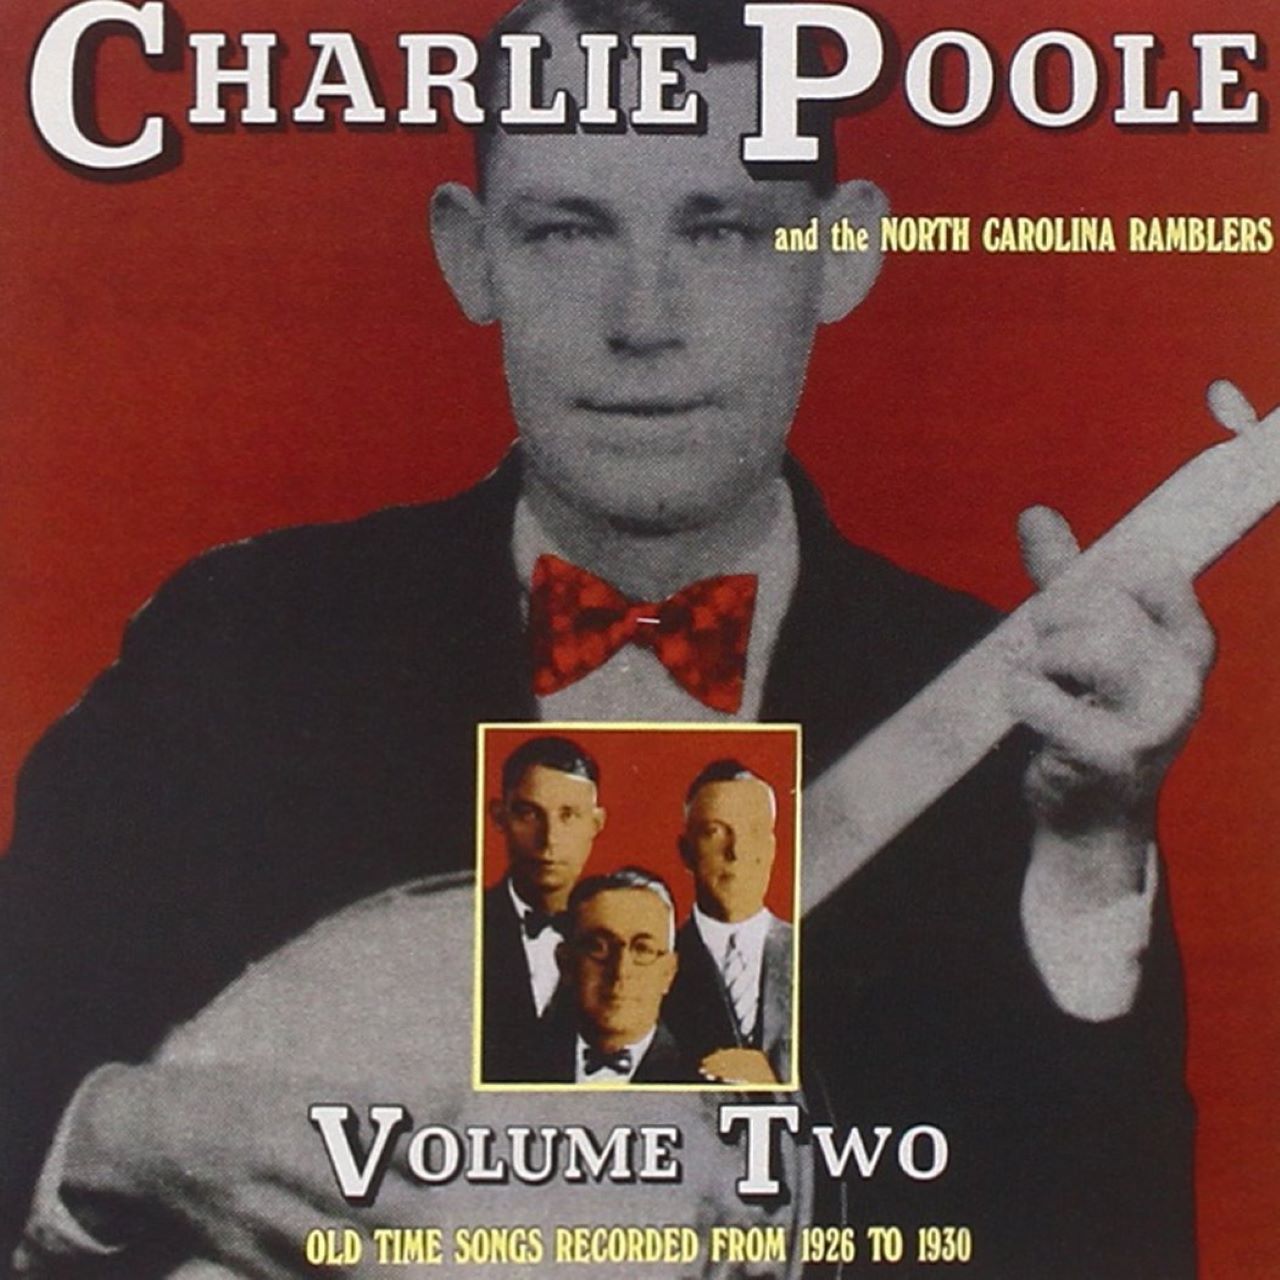 Charlie Poole And The North Carolina Ramblers - Old Time Songs, 1926-30, Vol. 2 cover album